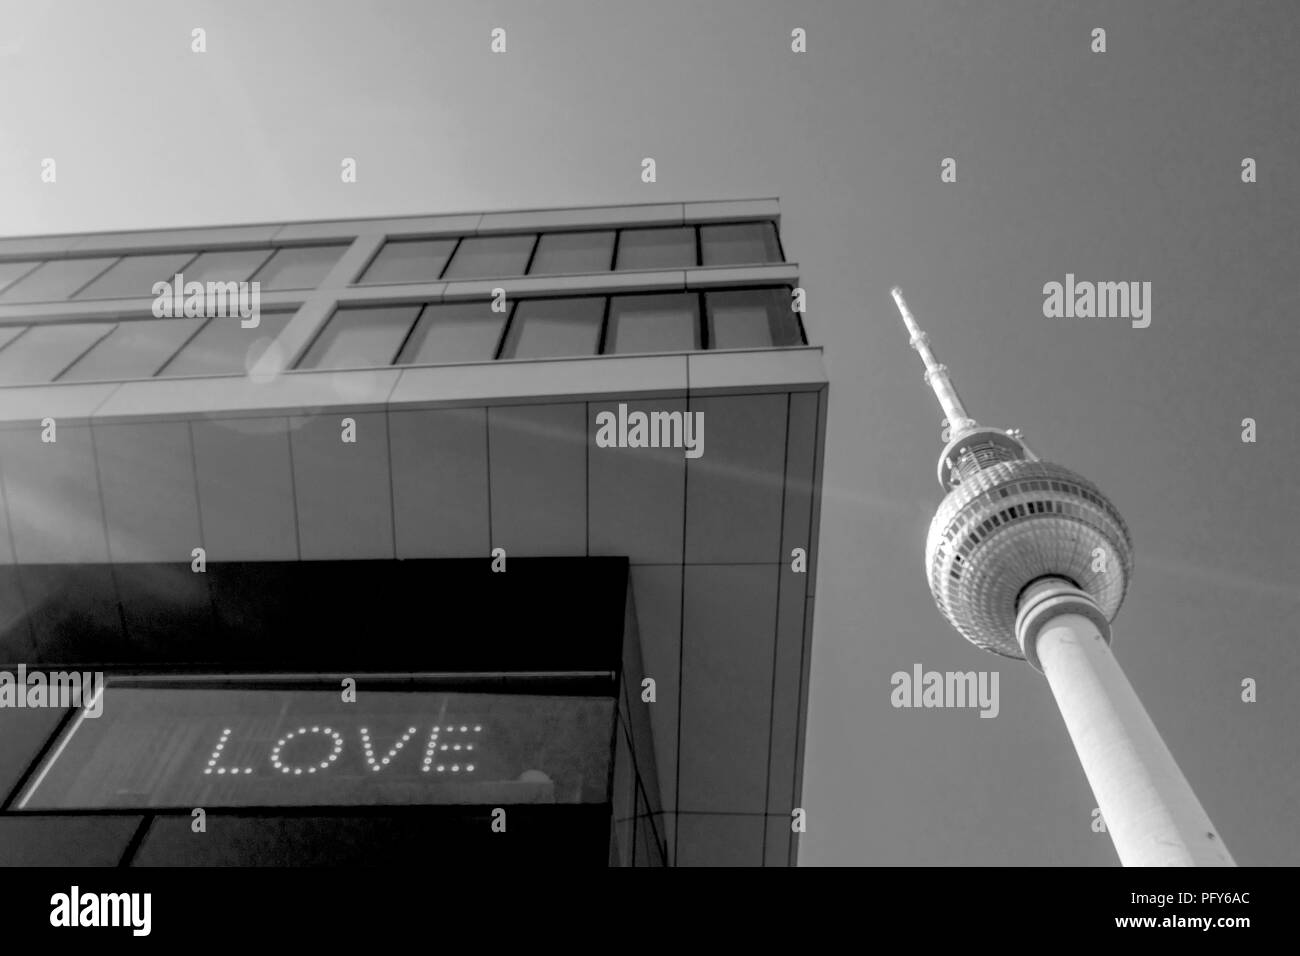 Monochrome of the Berlin TV tower (Fernsehturm) abstract next to a modern building with the word 'Love' displayed, Berlin Mitte, Germany Stock Photo